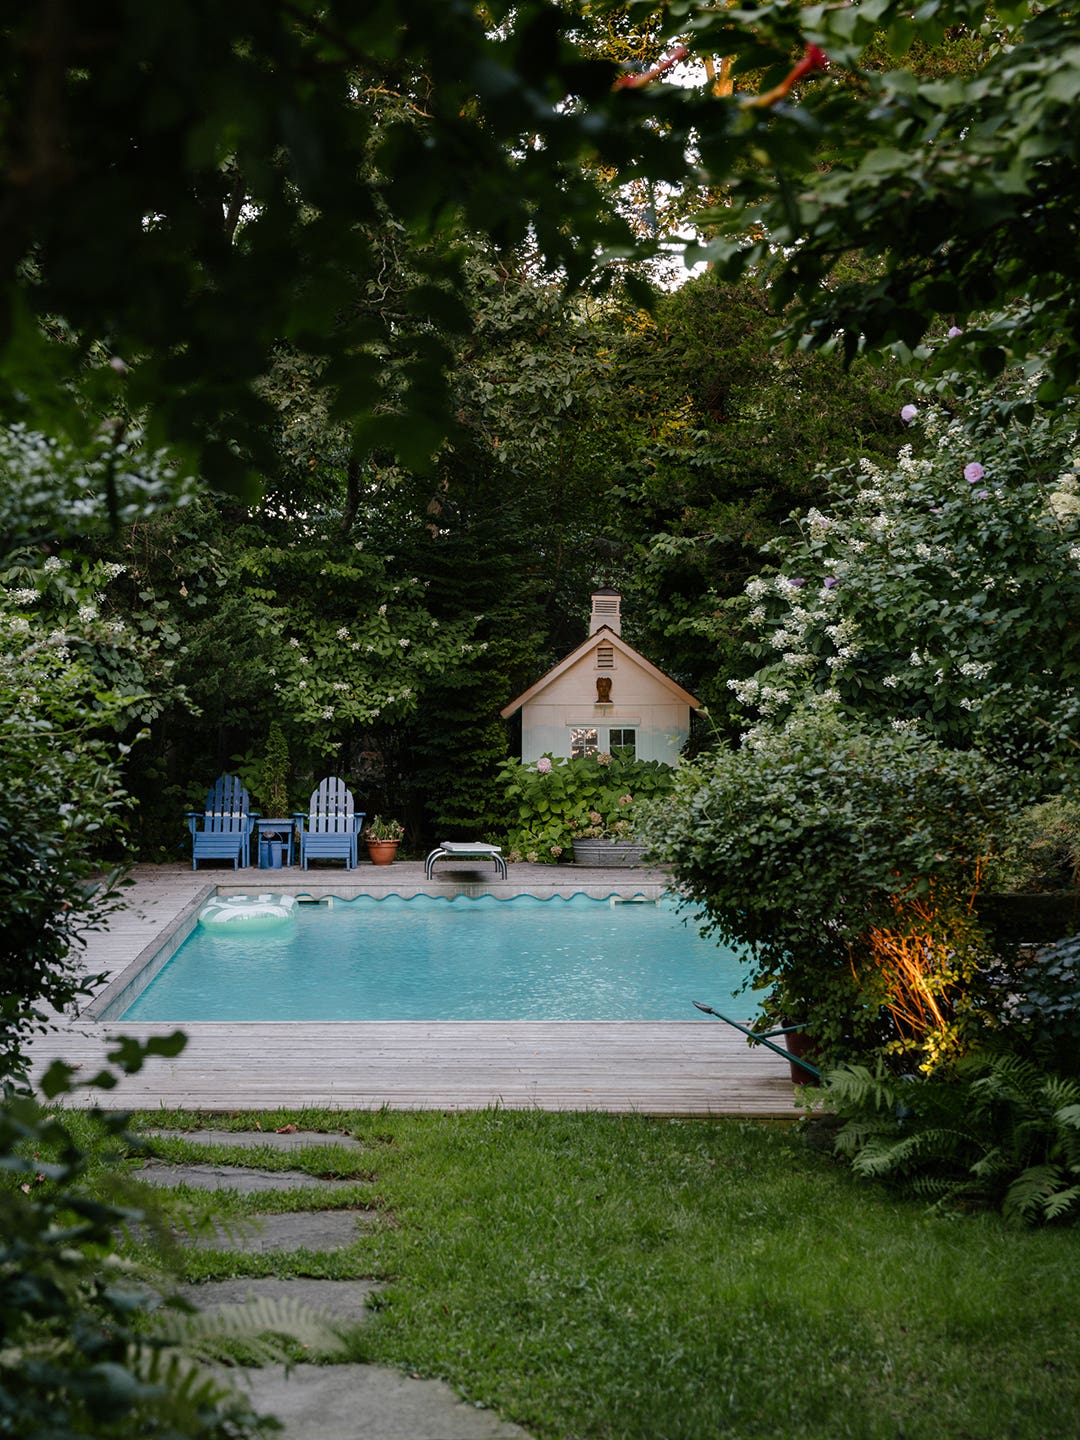 In This City, a Pool Will Boost Your Home Value 12% Higher Than Average